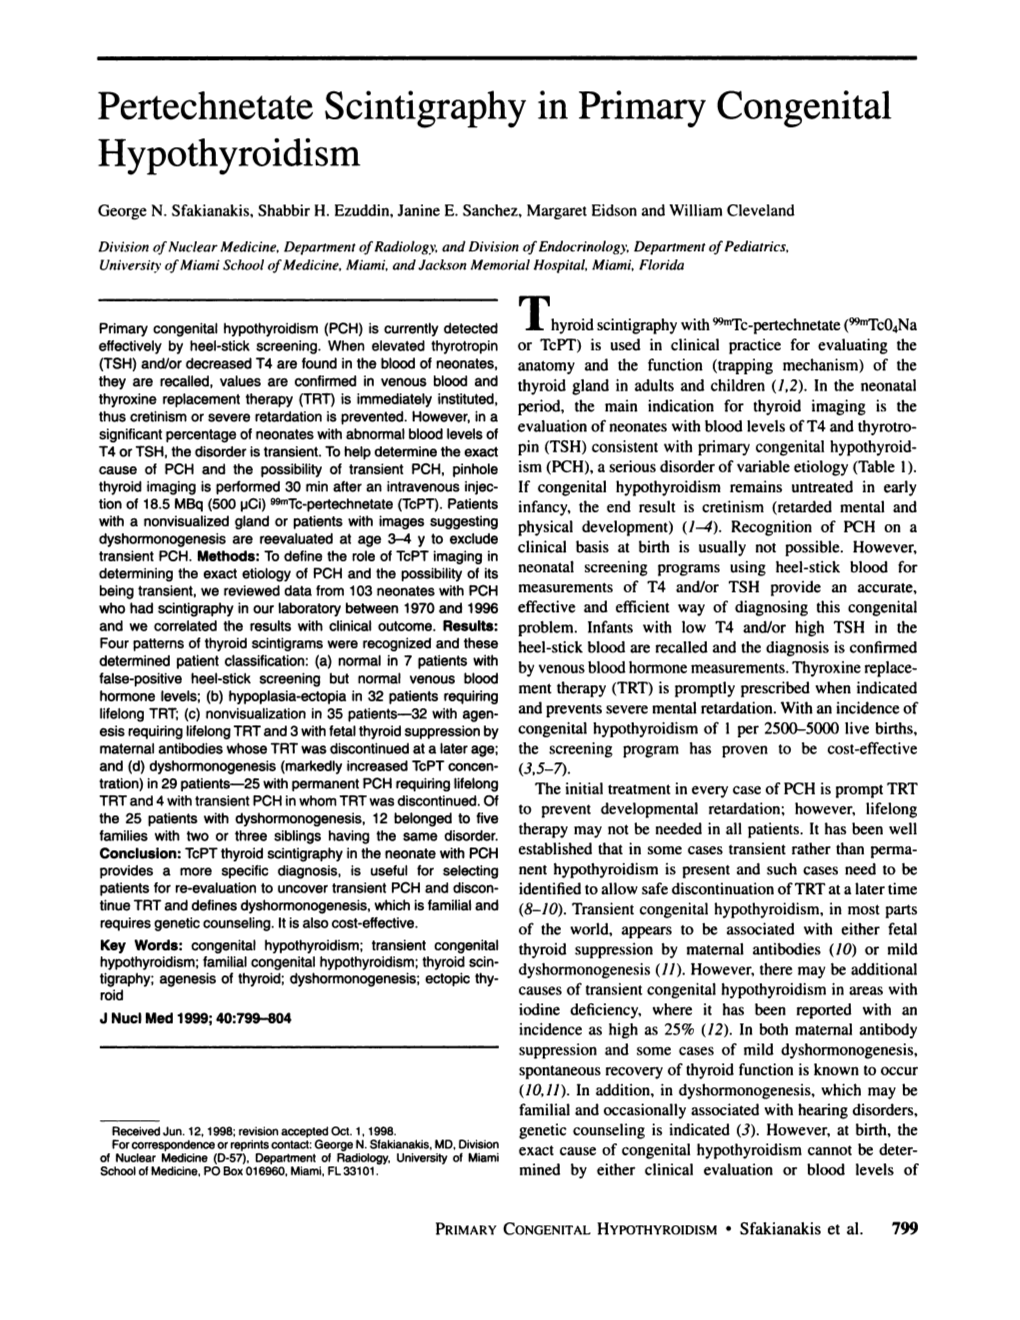 Pertechnetate Scintigraphy in Primary Congenital Hypothyroidism